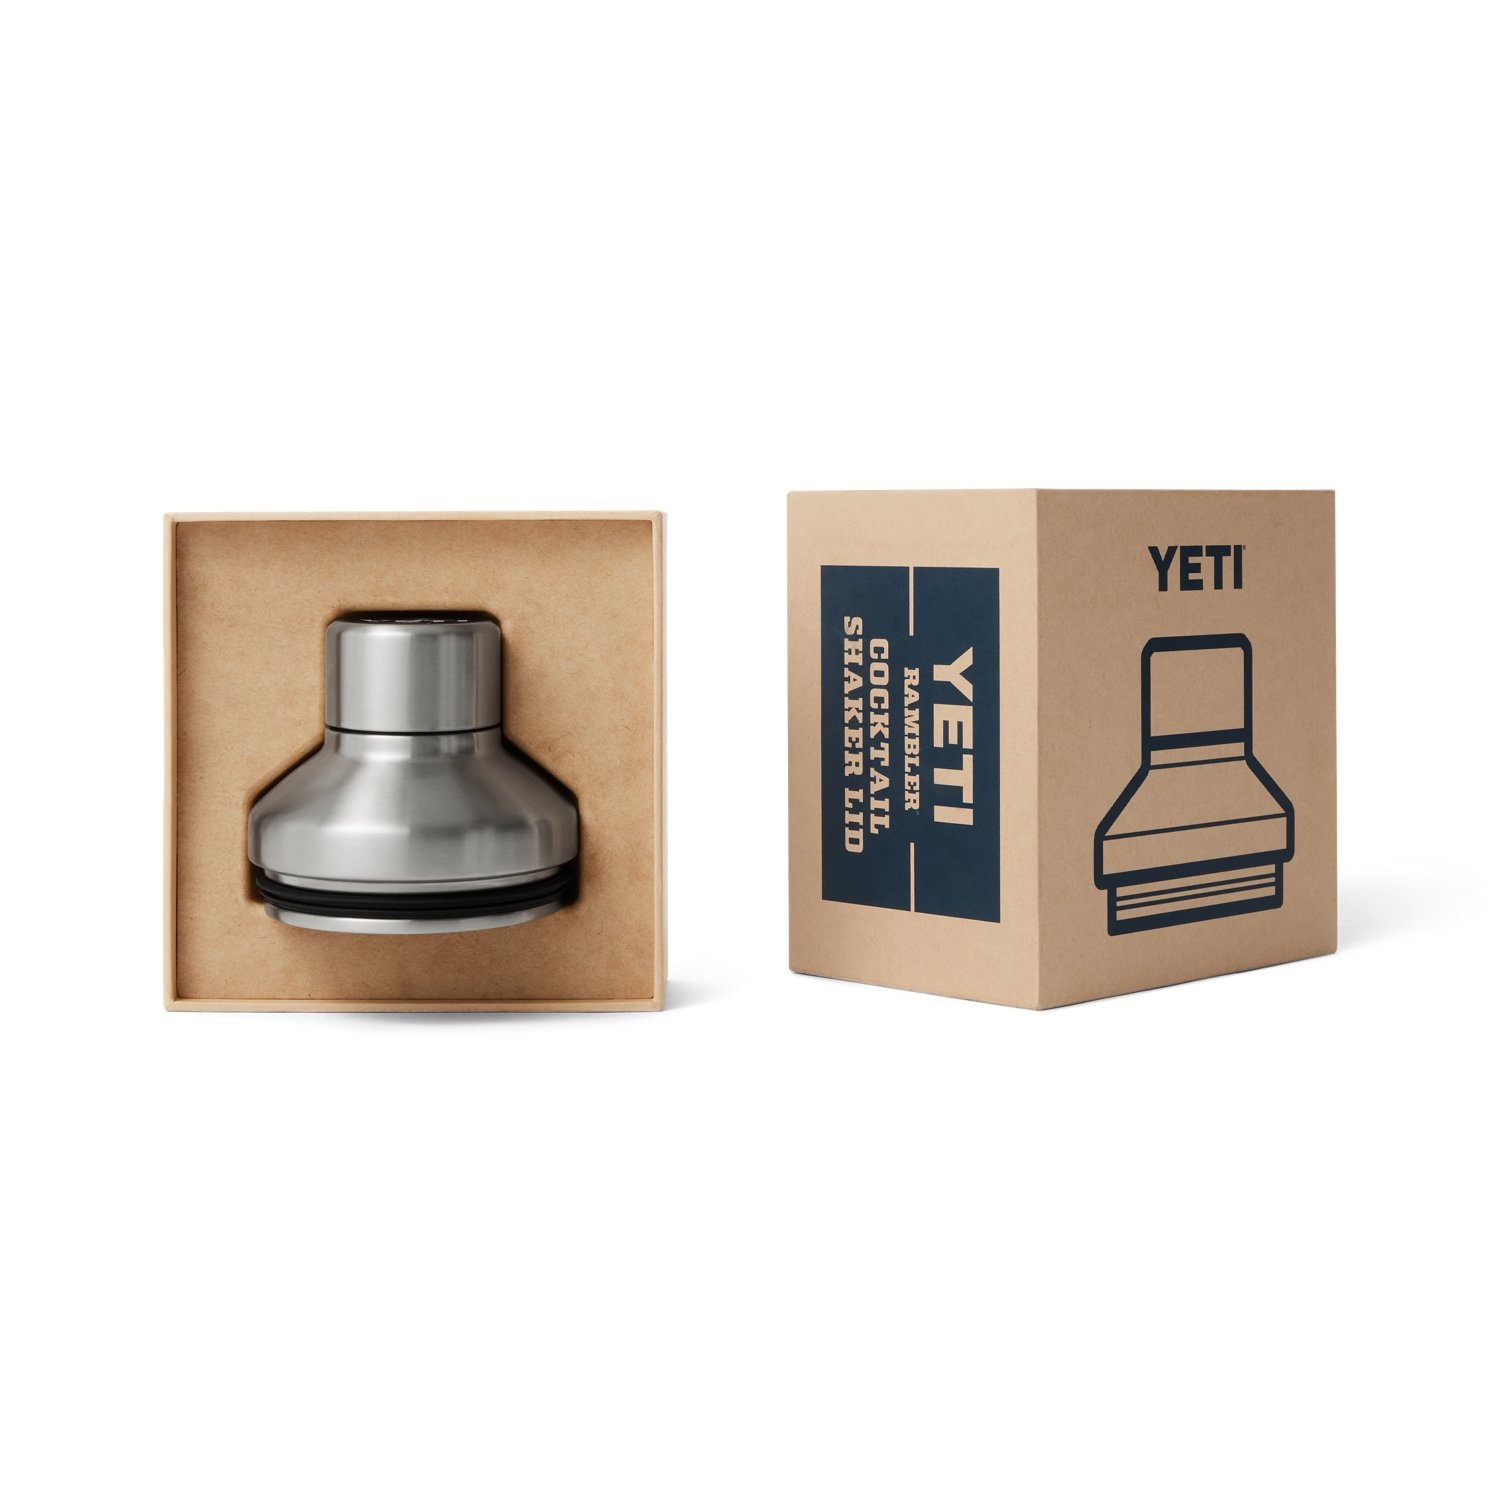 https://academy.scene7.com/is/image/academy//drinkware/yeti-rambler-cocktail-shaker-lid-21071501989-grey/a1682a97cbd34e7896f440548ec03b8e?$pdp-mobile-gallery-ng$